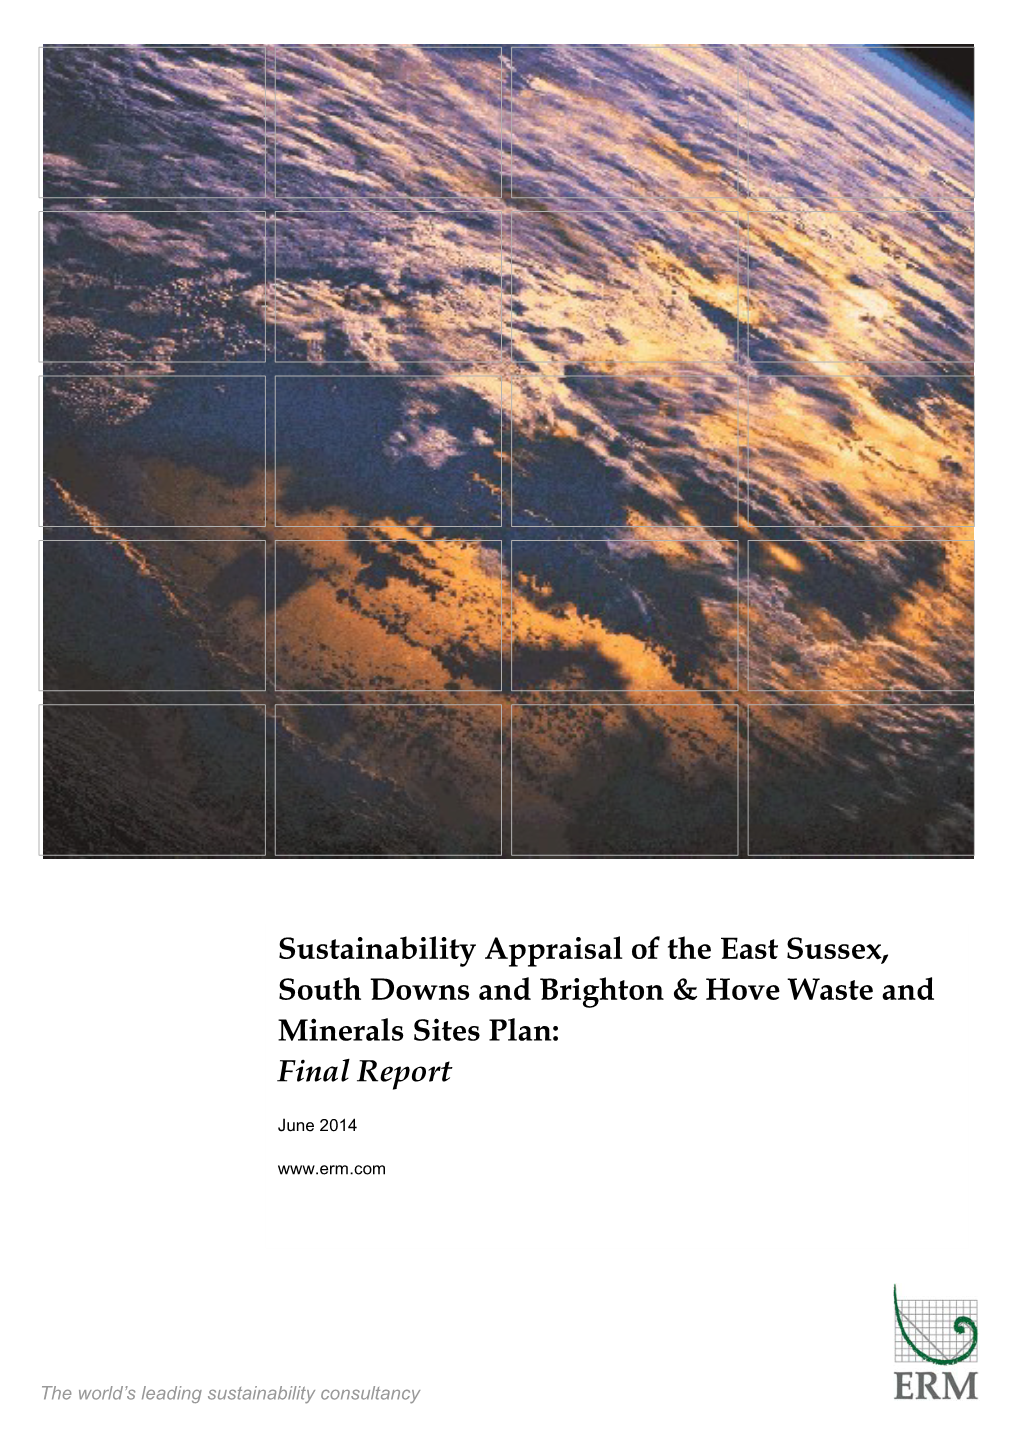 Sustainability Appraisal of the East Sussex, South Downs and Brighton & Hove Waste and Minerals Sites Plan: Final Report